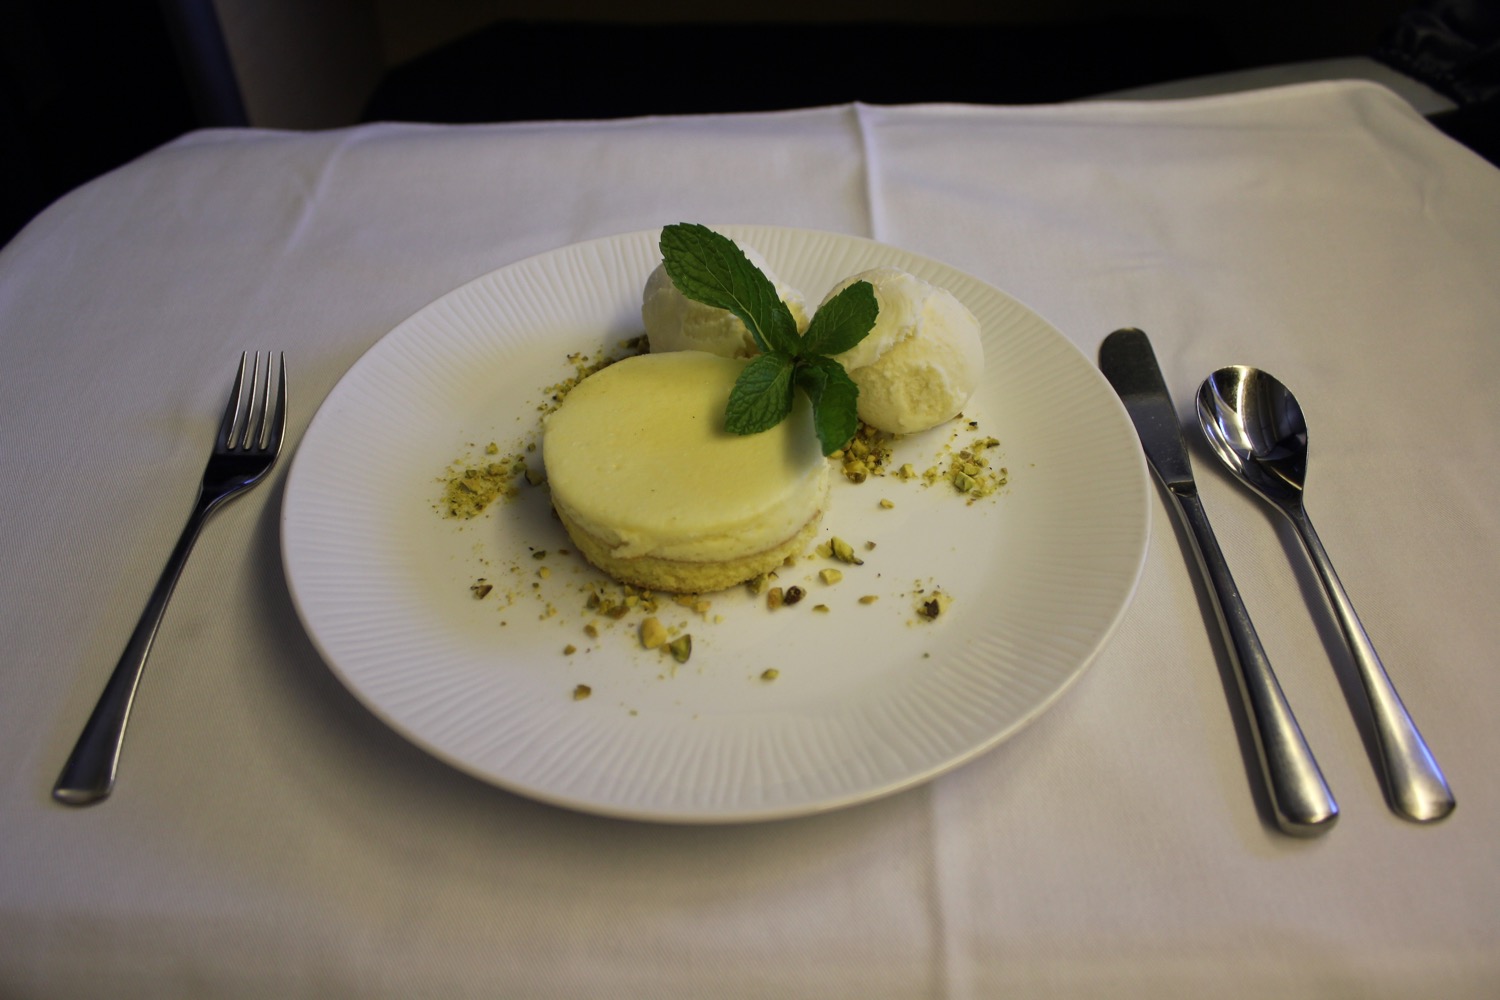 a plate of dessert with ice cream and mint leaves